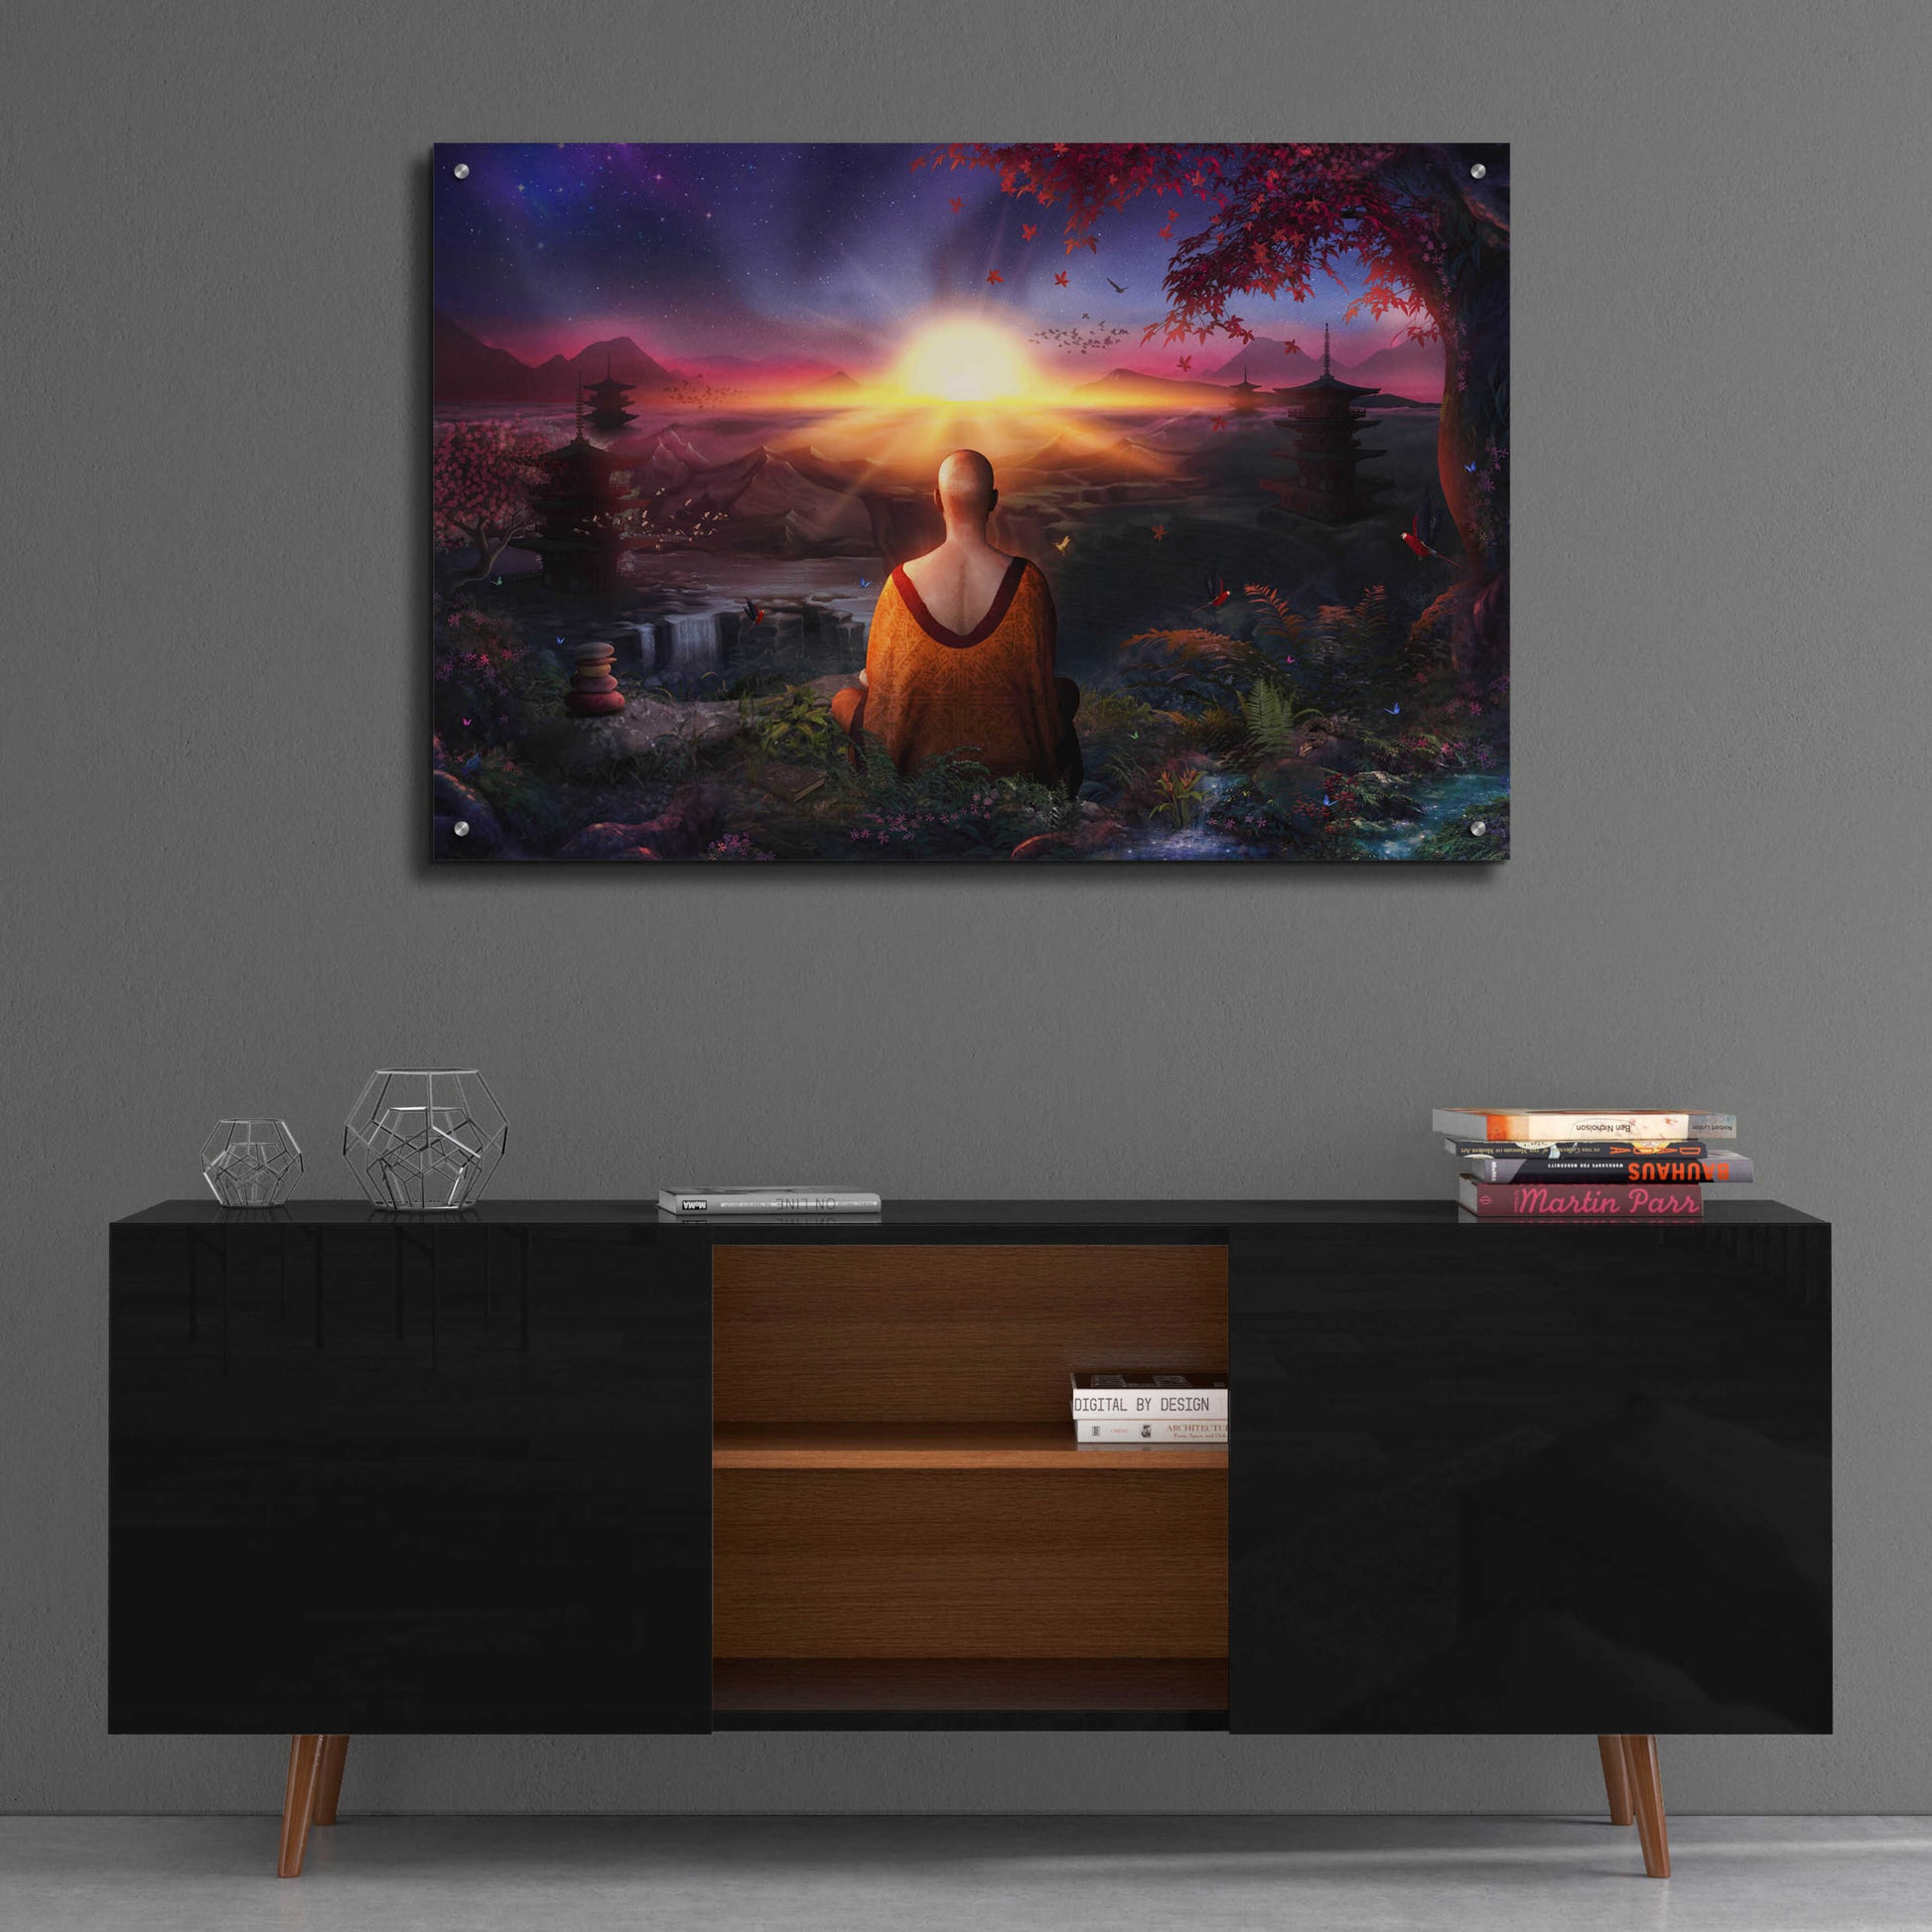 Epic Art 'A Magical Existence' by Cameron Gray, Acrylic Glass Wall Art,36x24